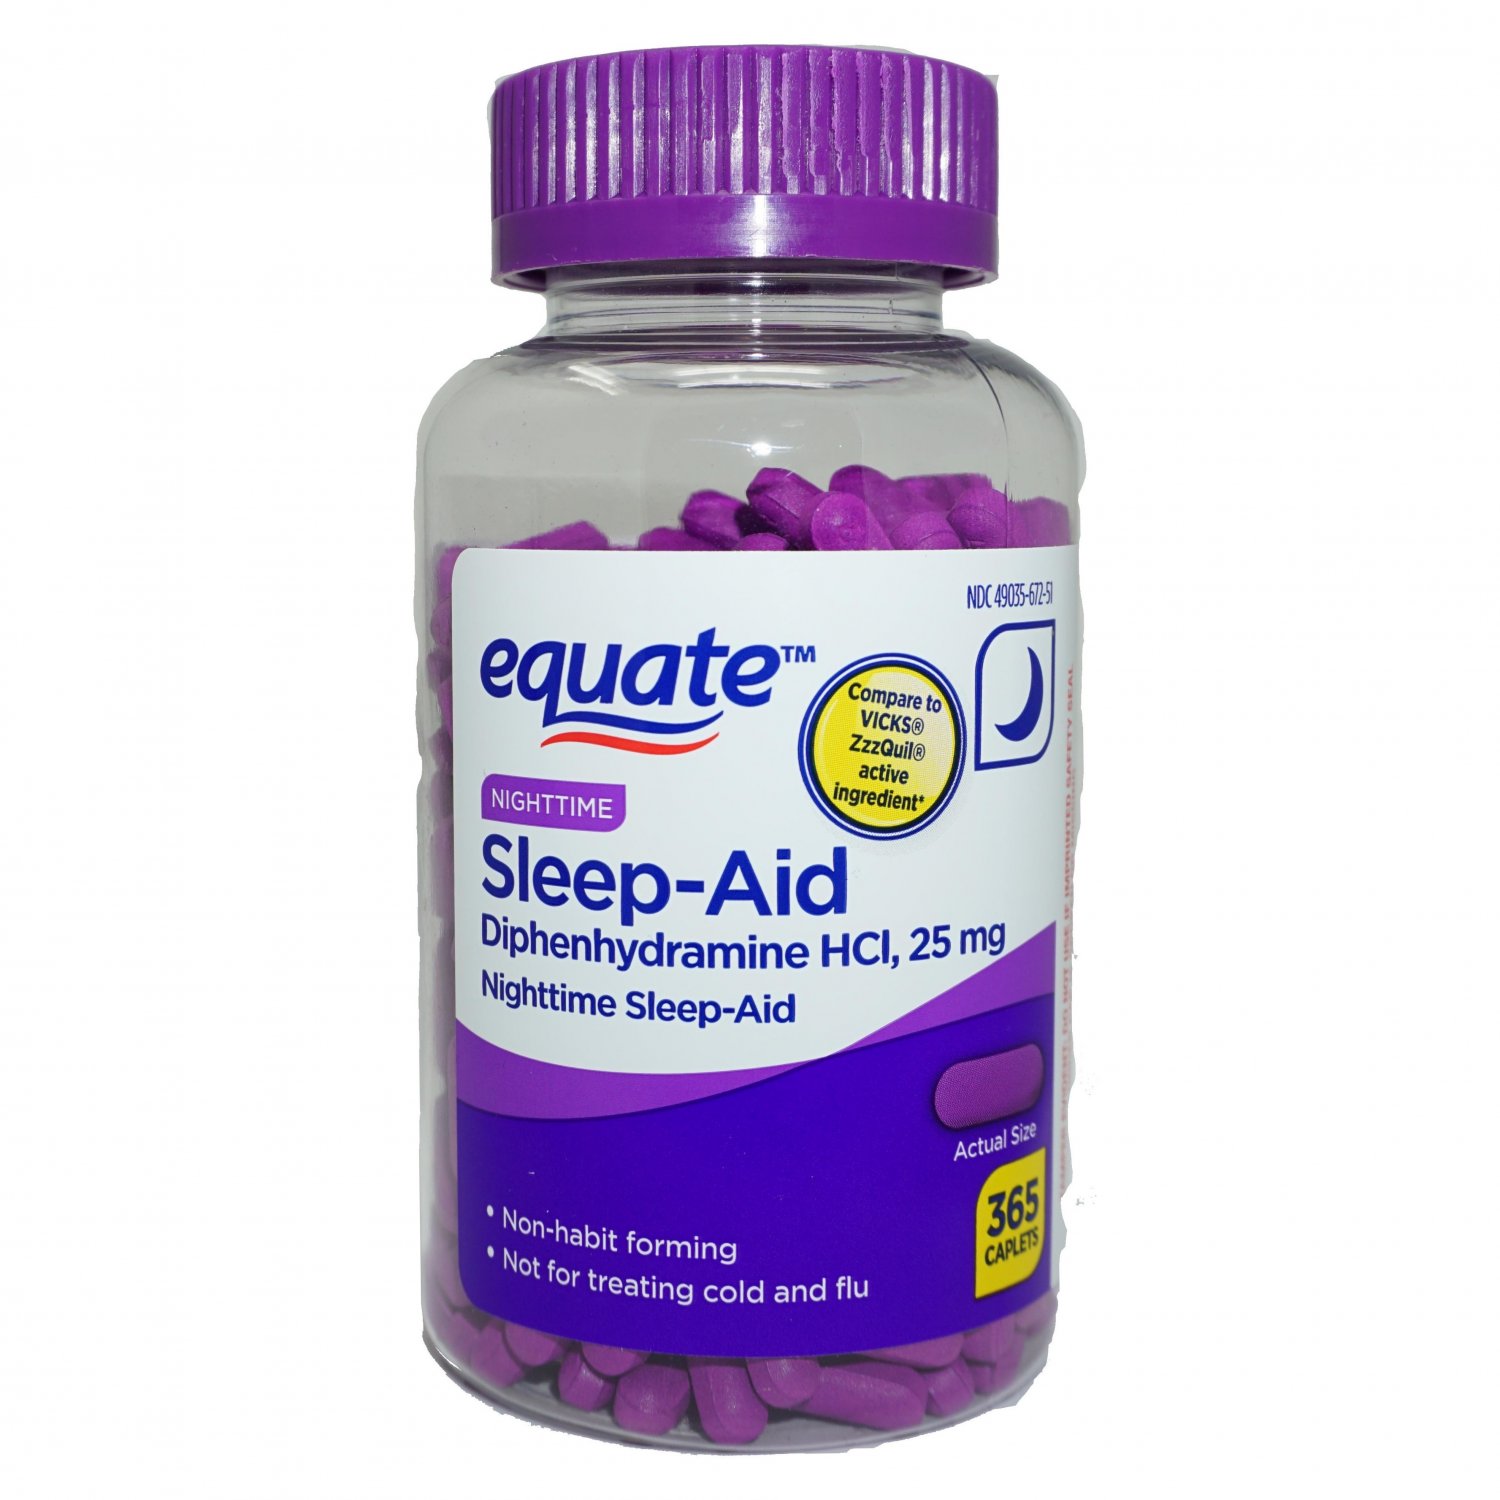 Equate Nighttime Sleep-Aid Relief Caplets, Diphenhydramine HCl 25mg, 365 Count